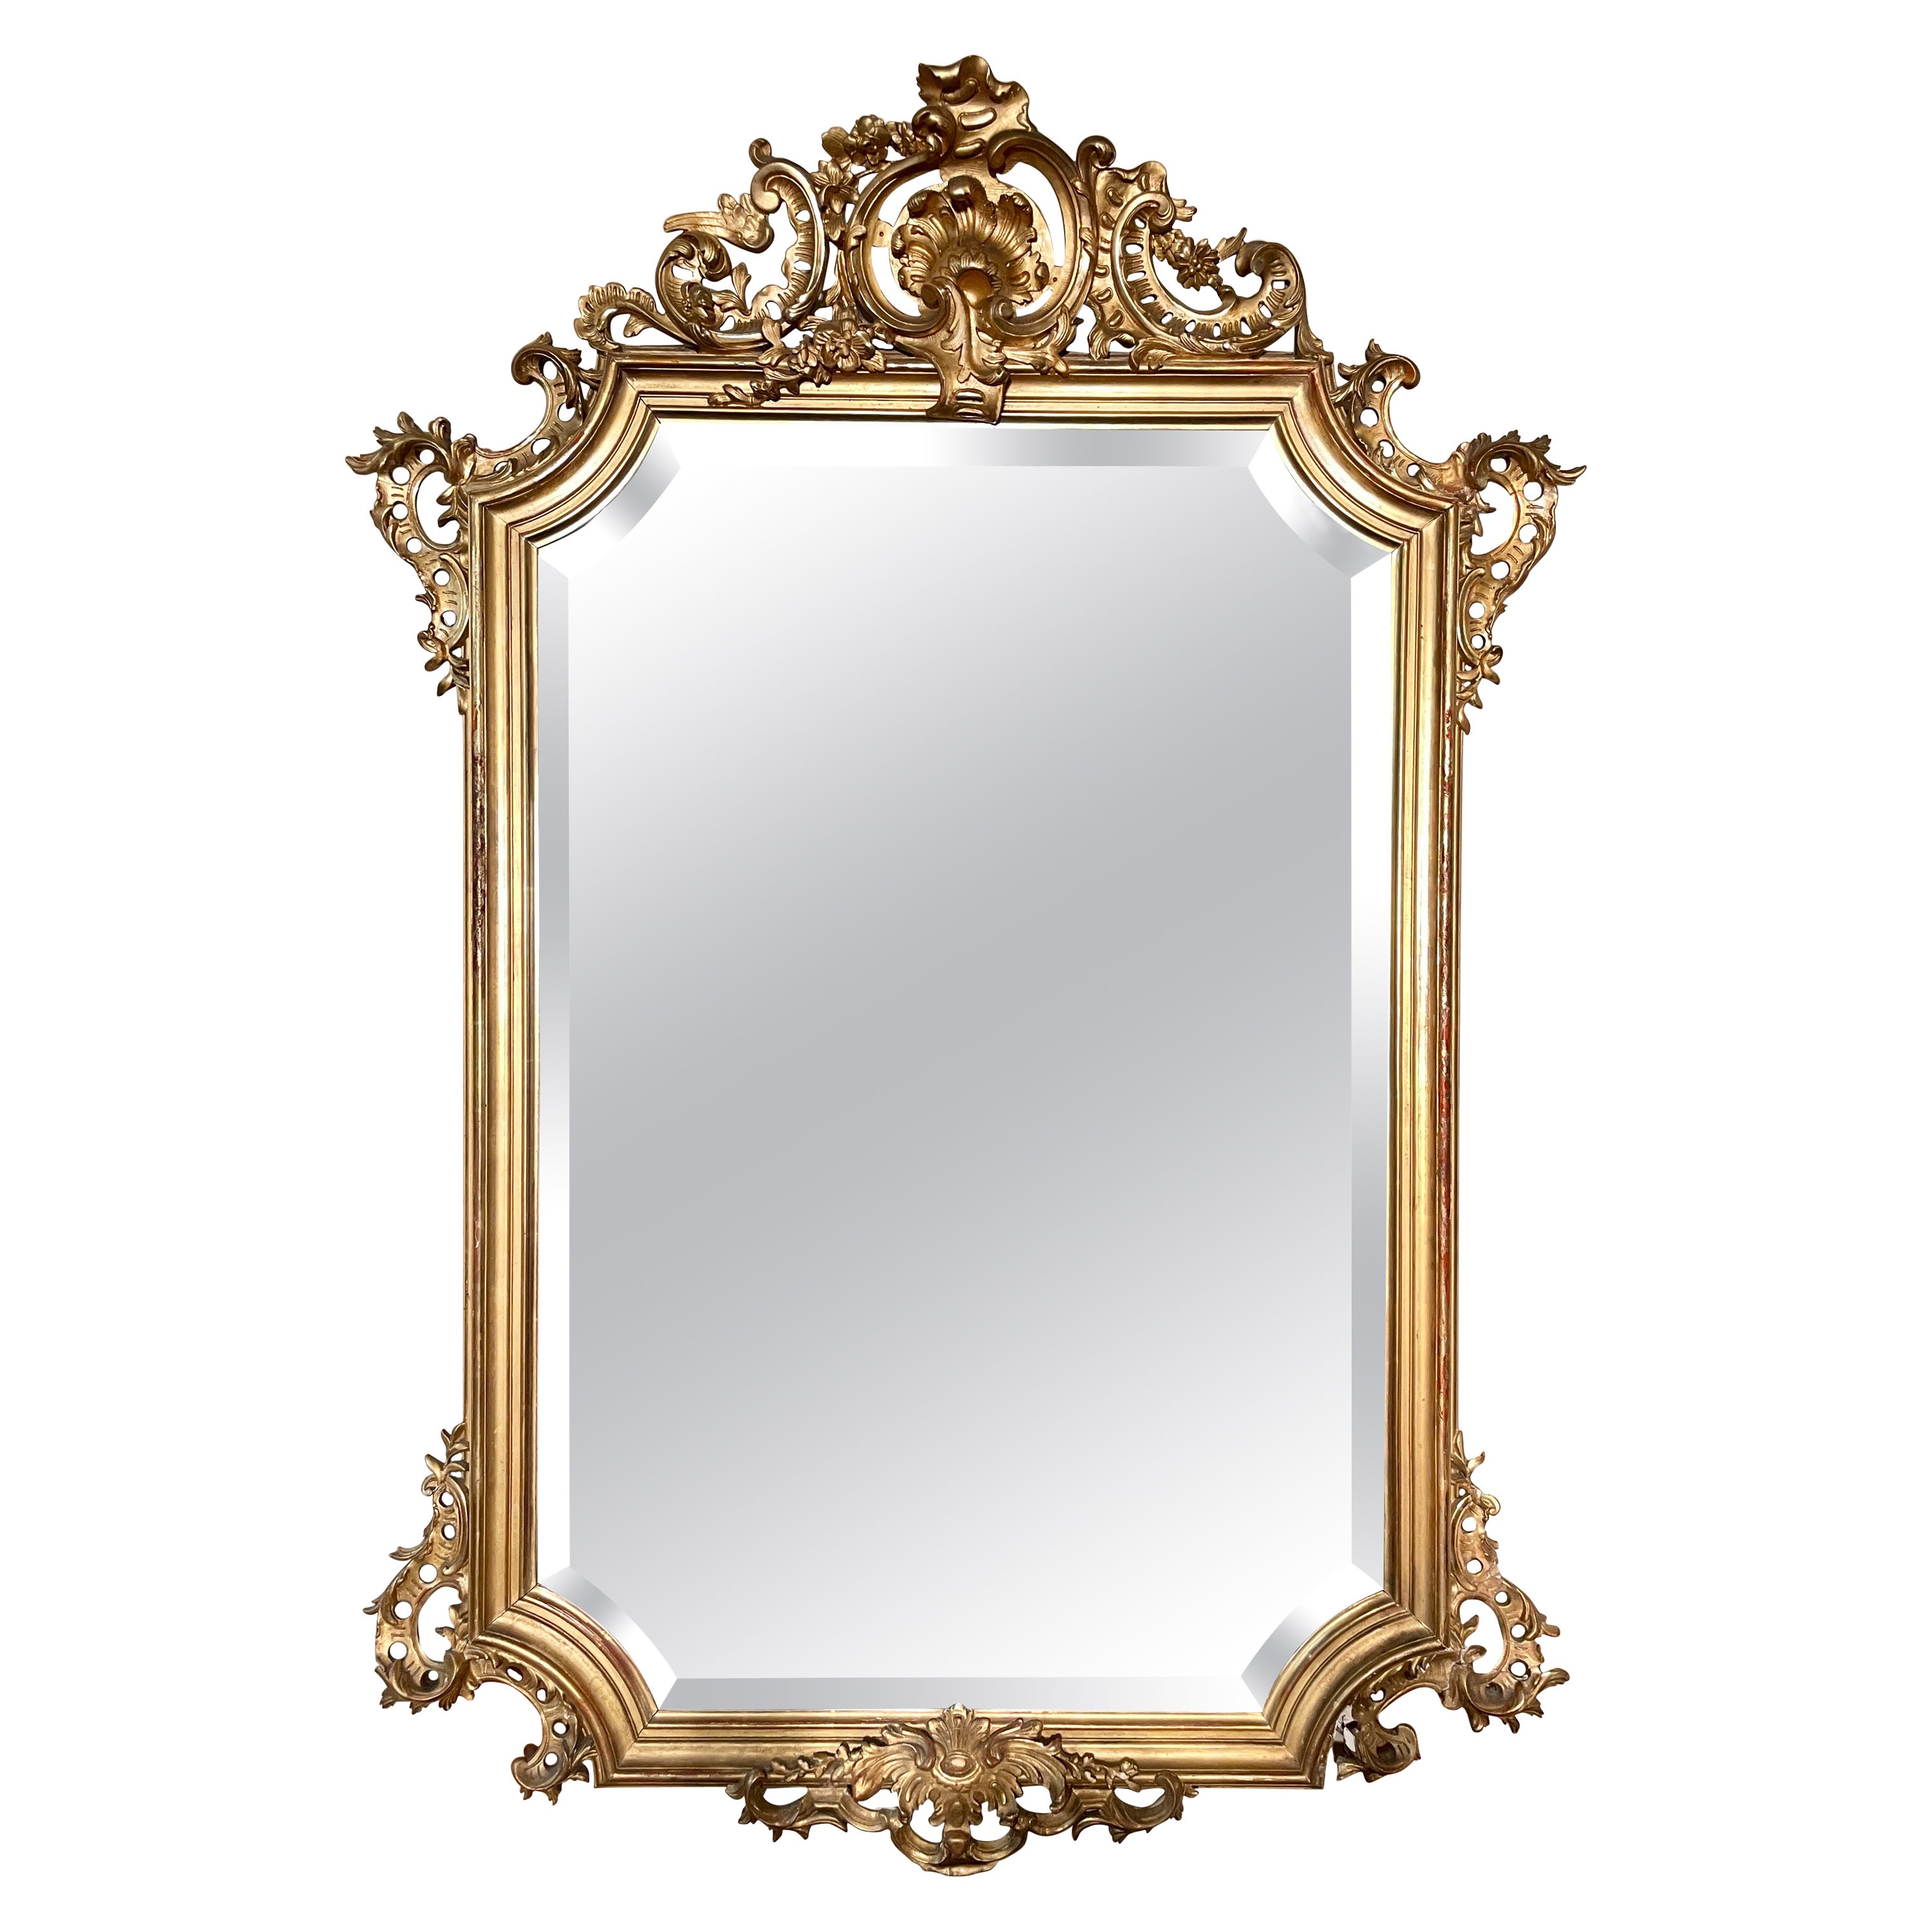 Antique French Carved Giltwood Mirror with Beveling, Circa 1860.